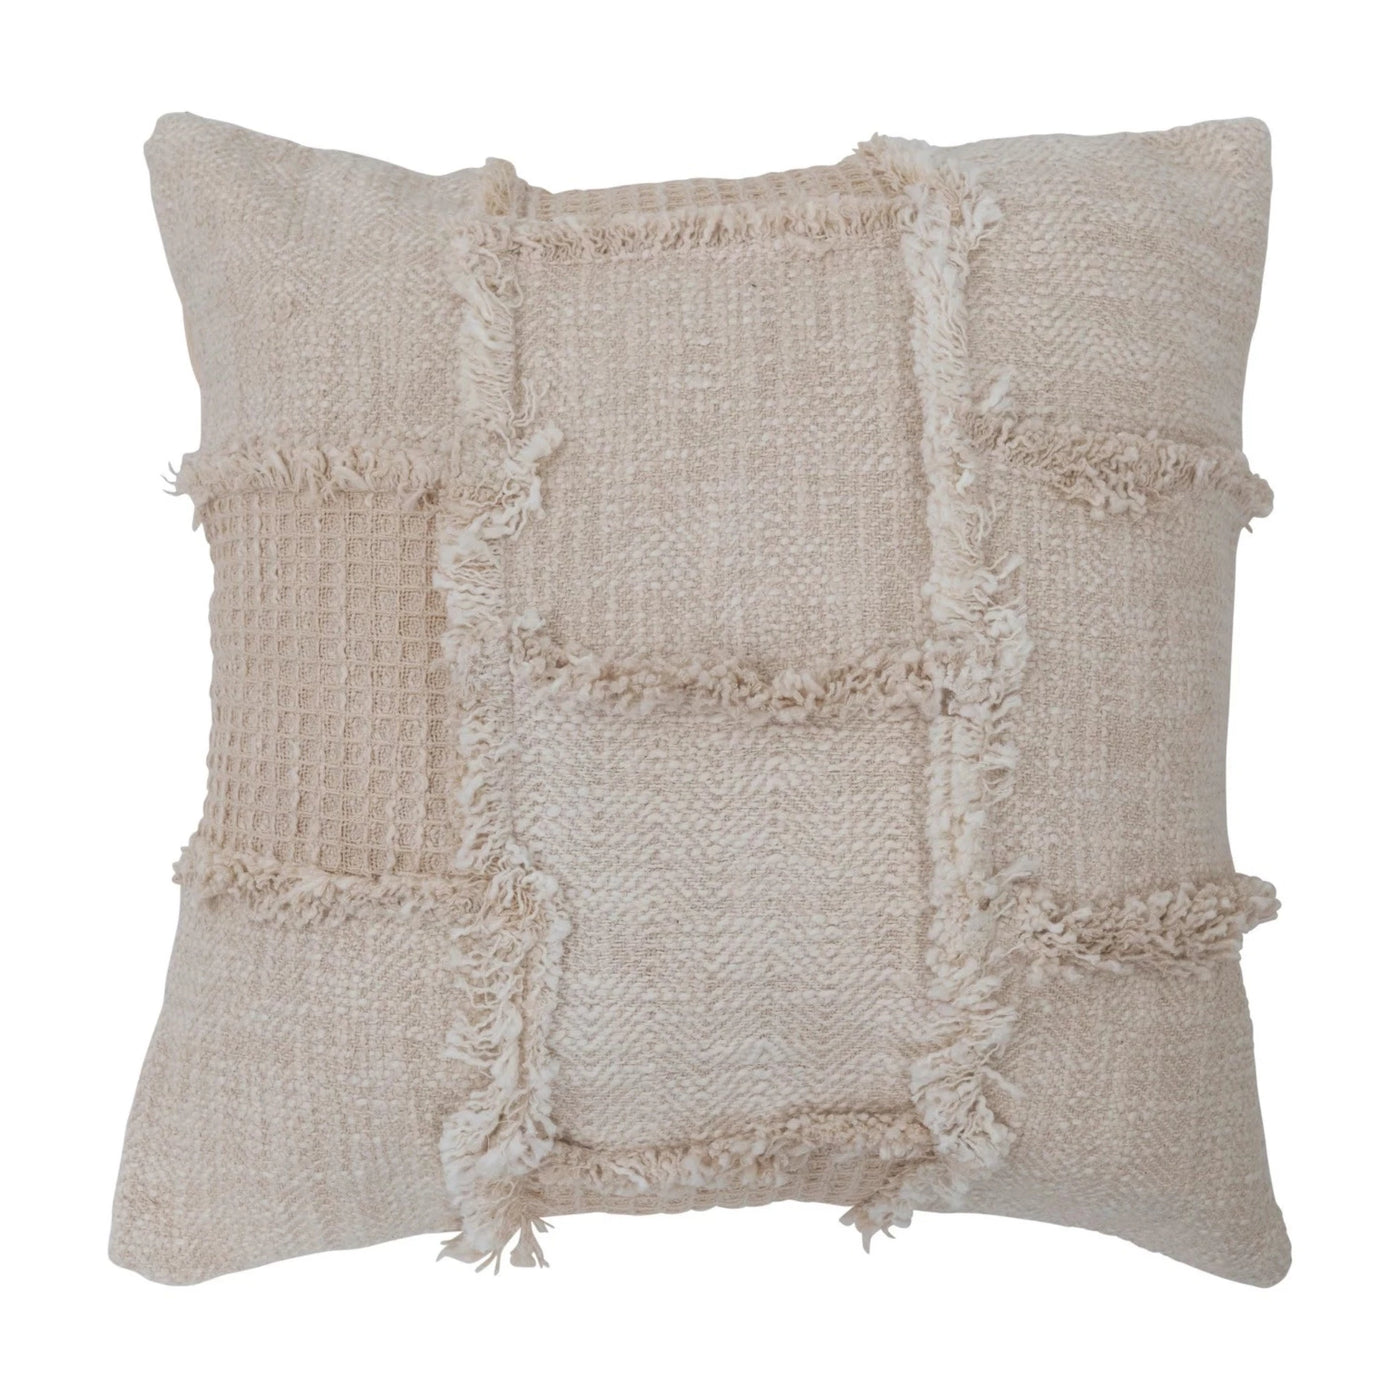 Fringed Patchwork Pillow